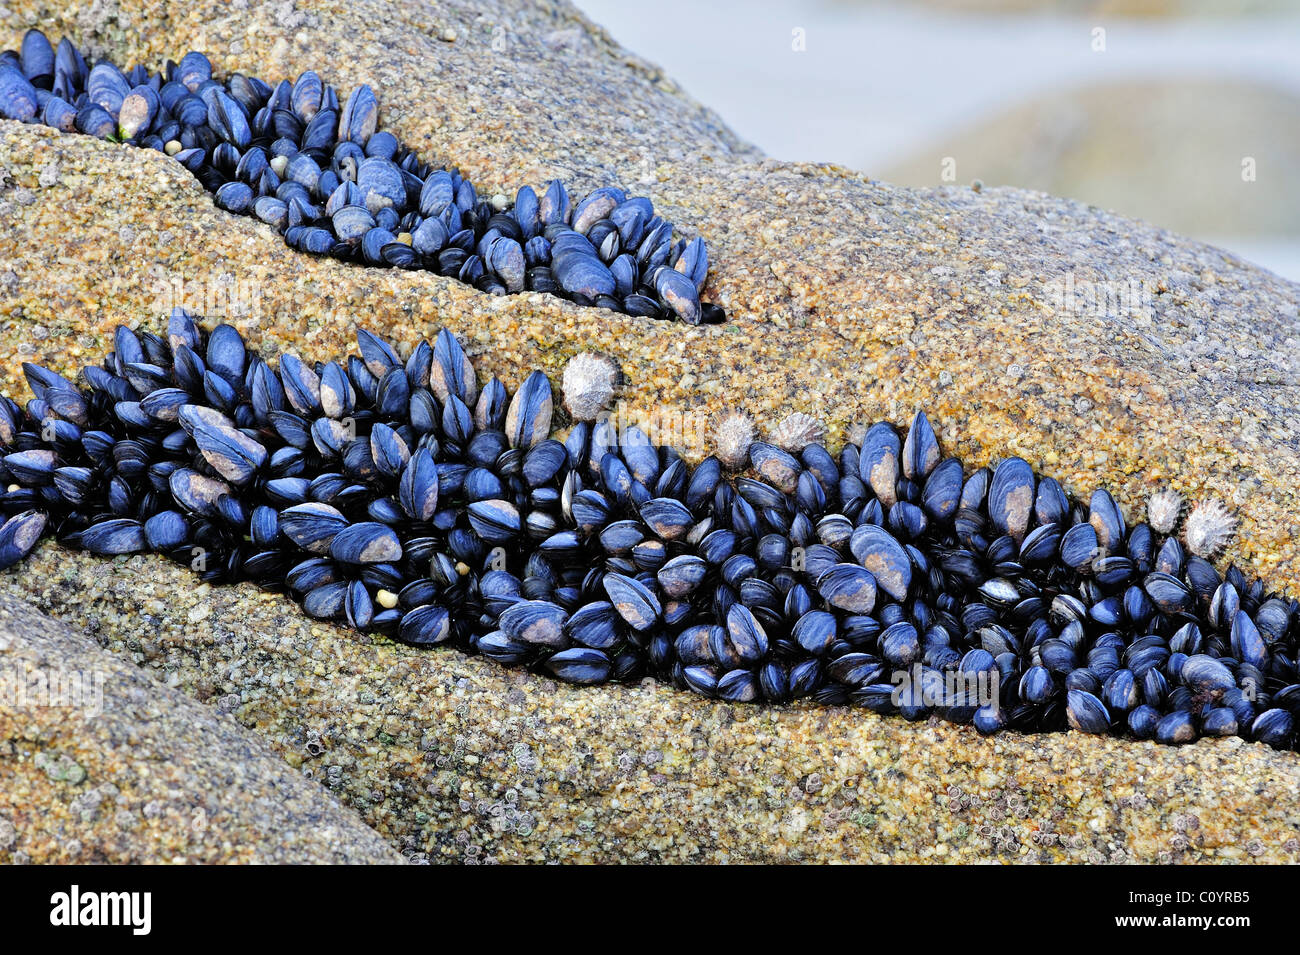 Bed of exposed Common / Blue mussels (Mytilus edulis) on rocks at low tide Stock Photo